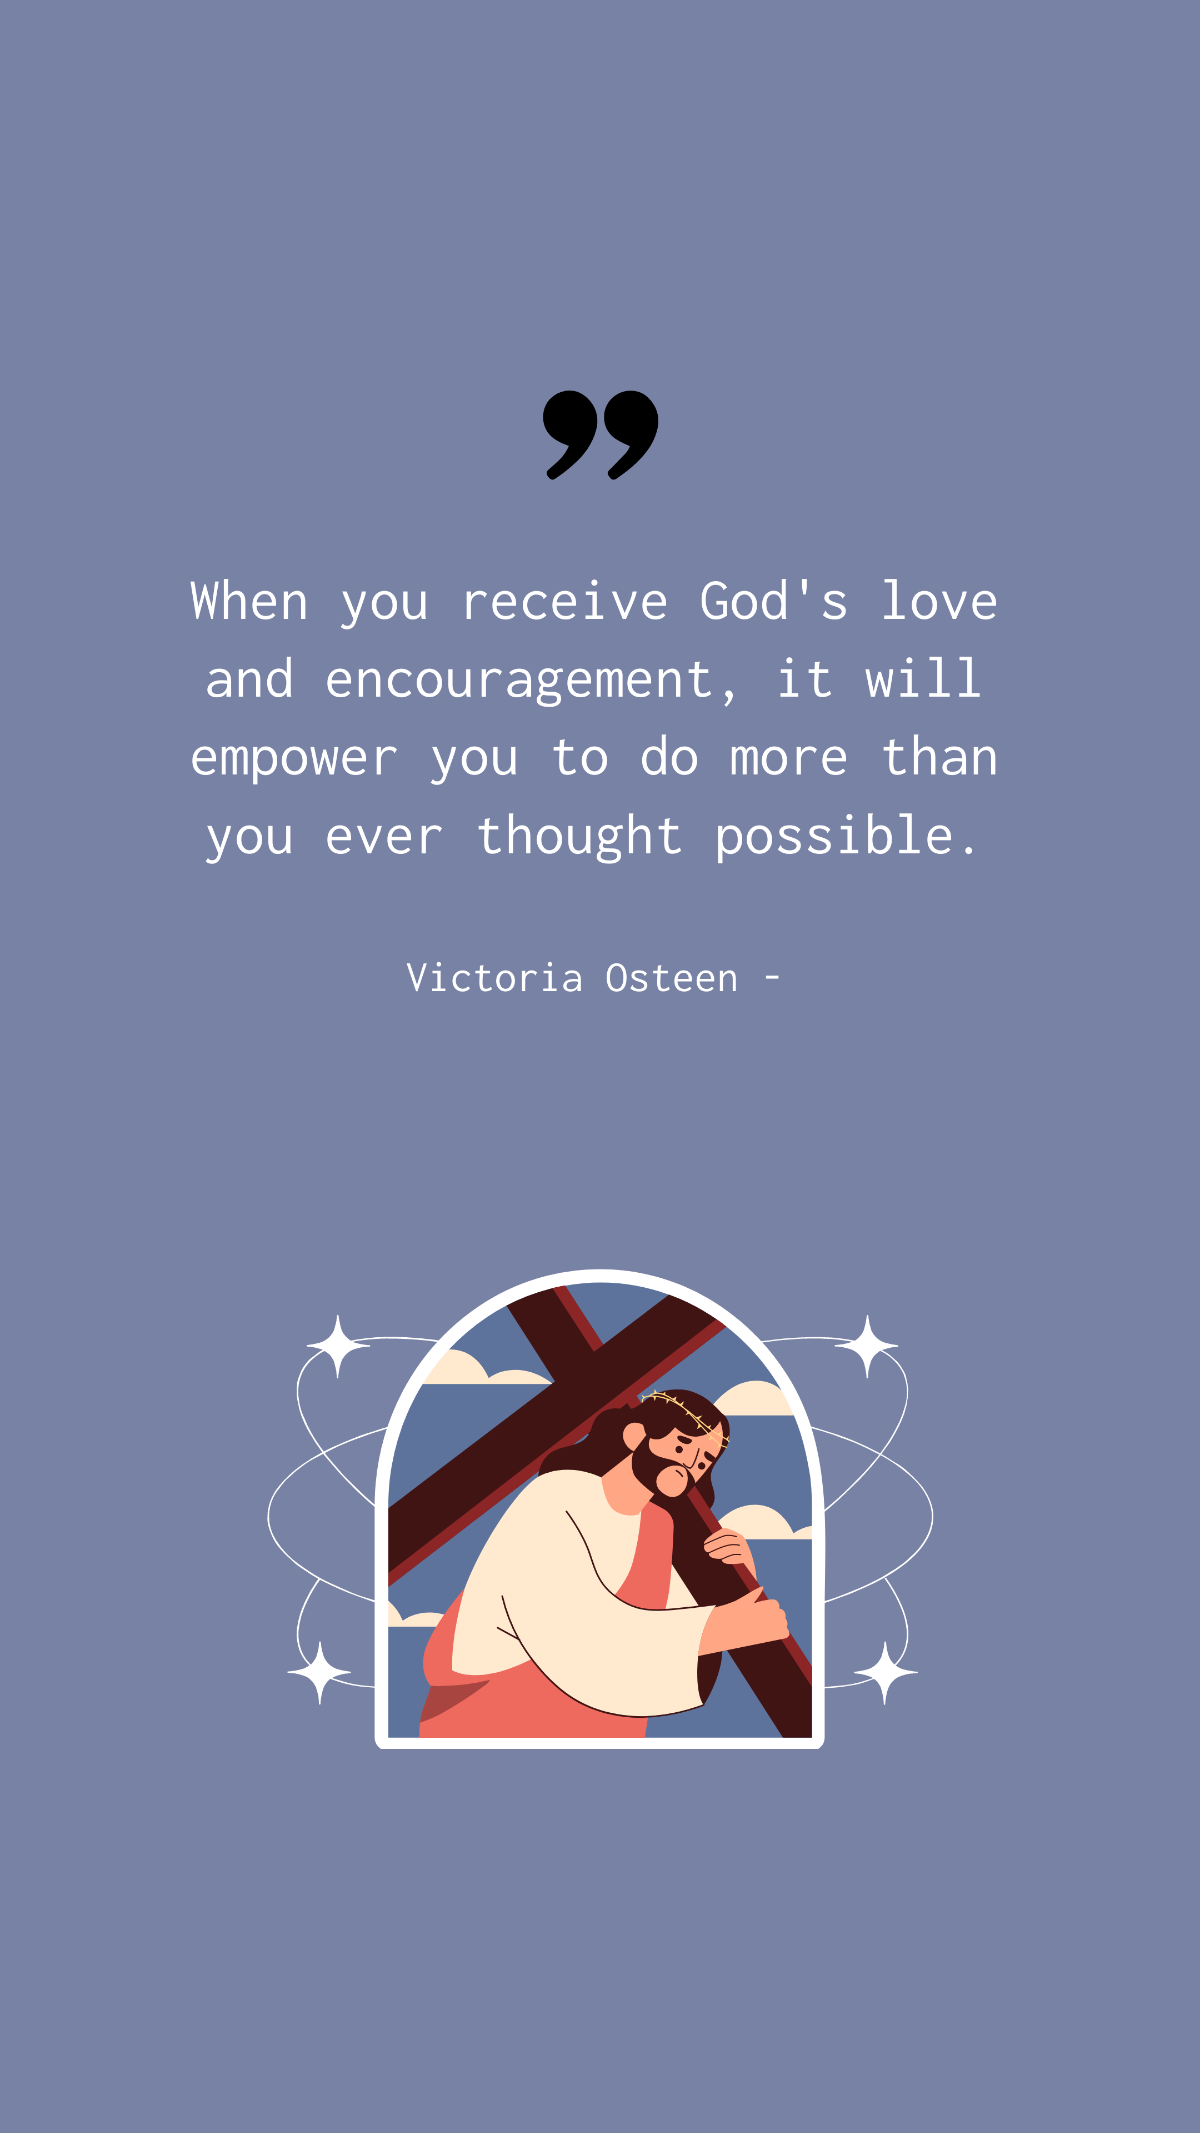 Victoria Osteen - When you receive God's love and encouragement, it will empower you to do more than you ever thought possible. Template